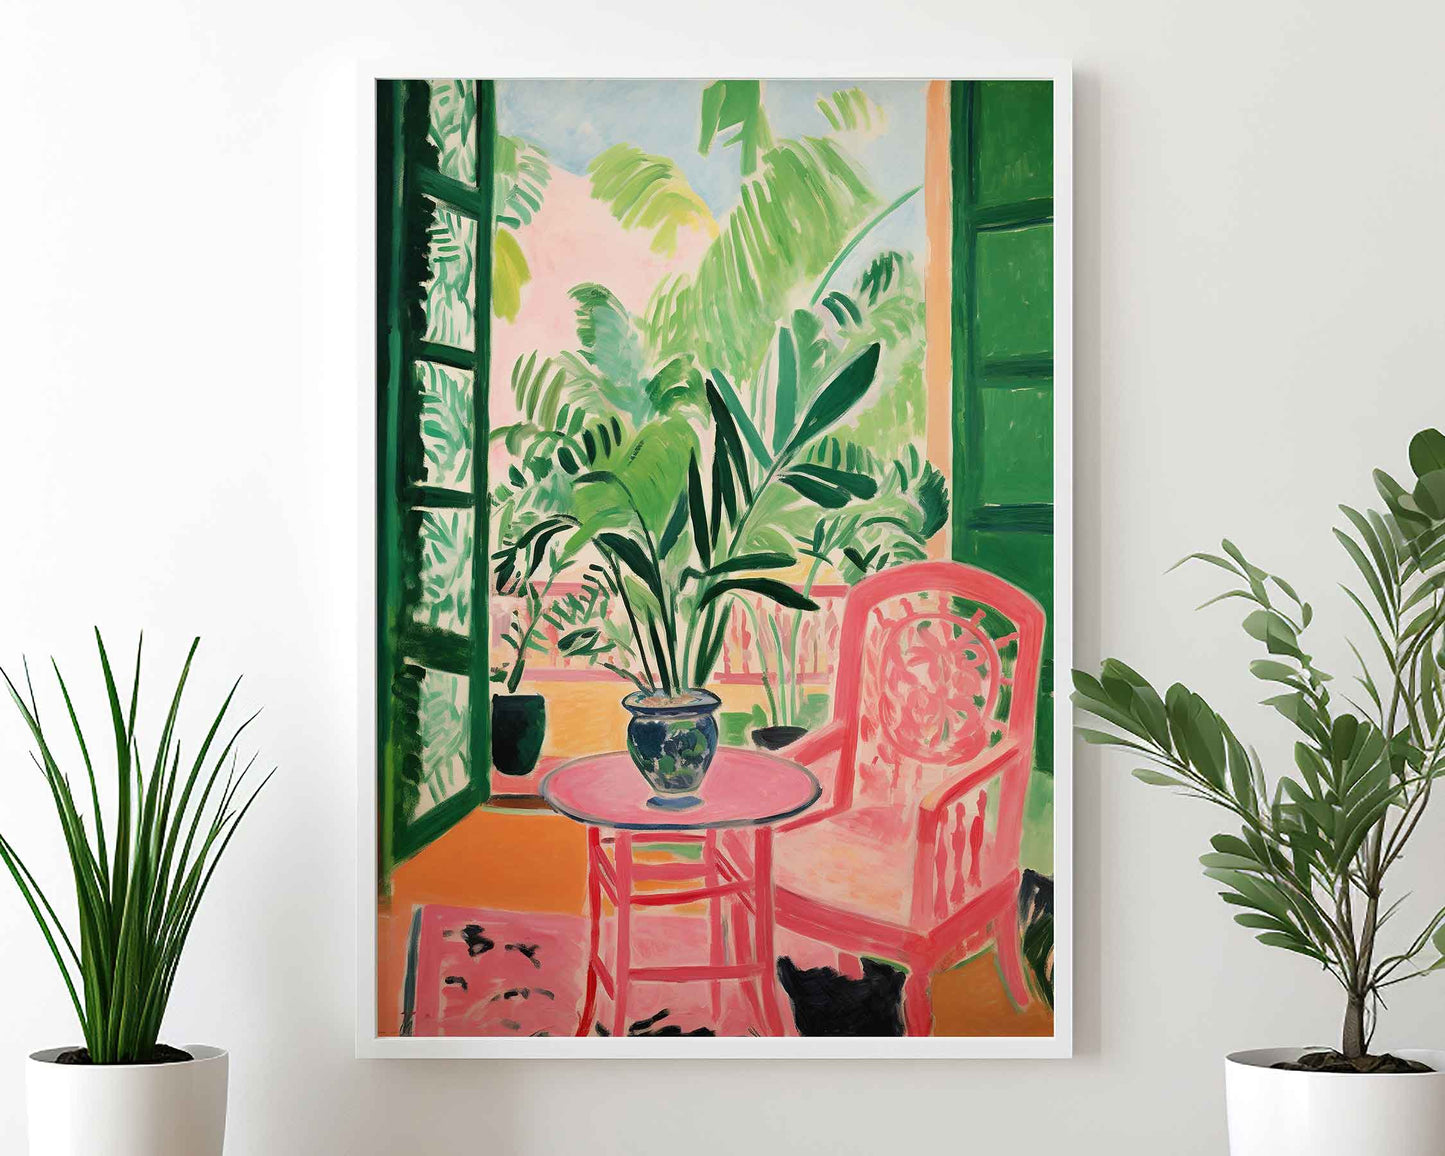 Framed Image of Matisse Art Style Wall Poster Print Green Themed Oil Paintings